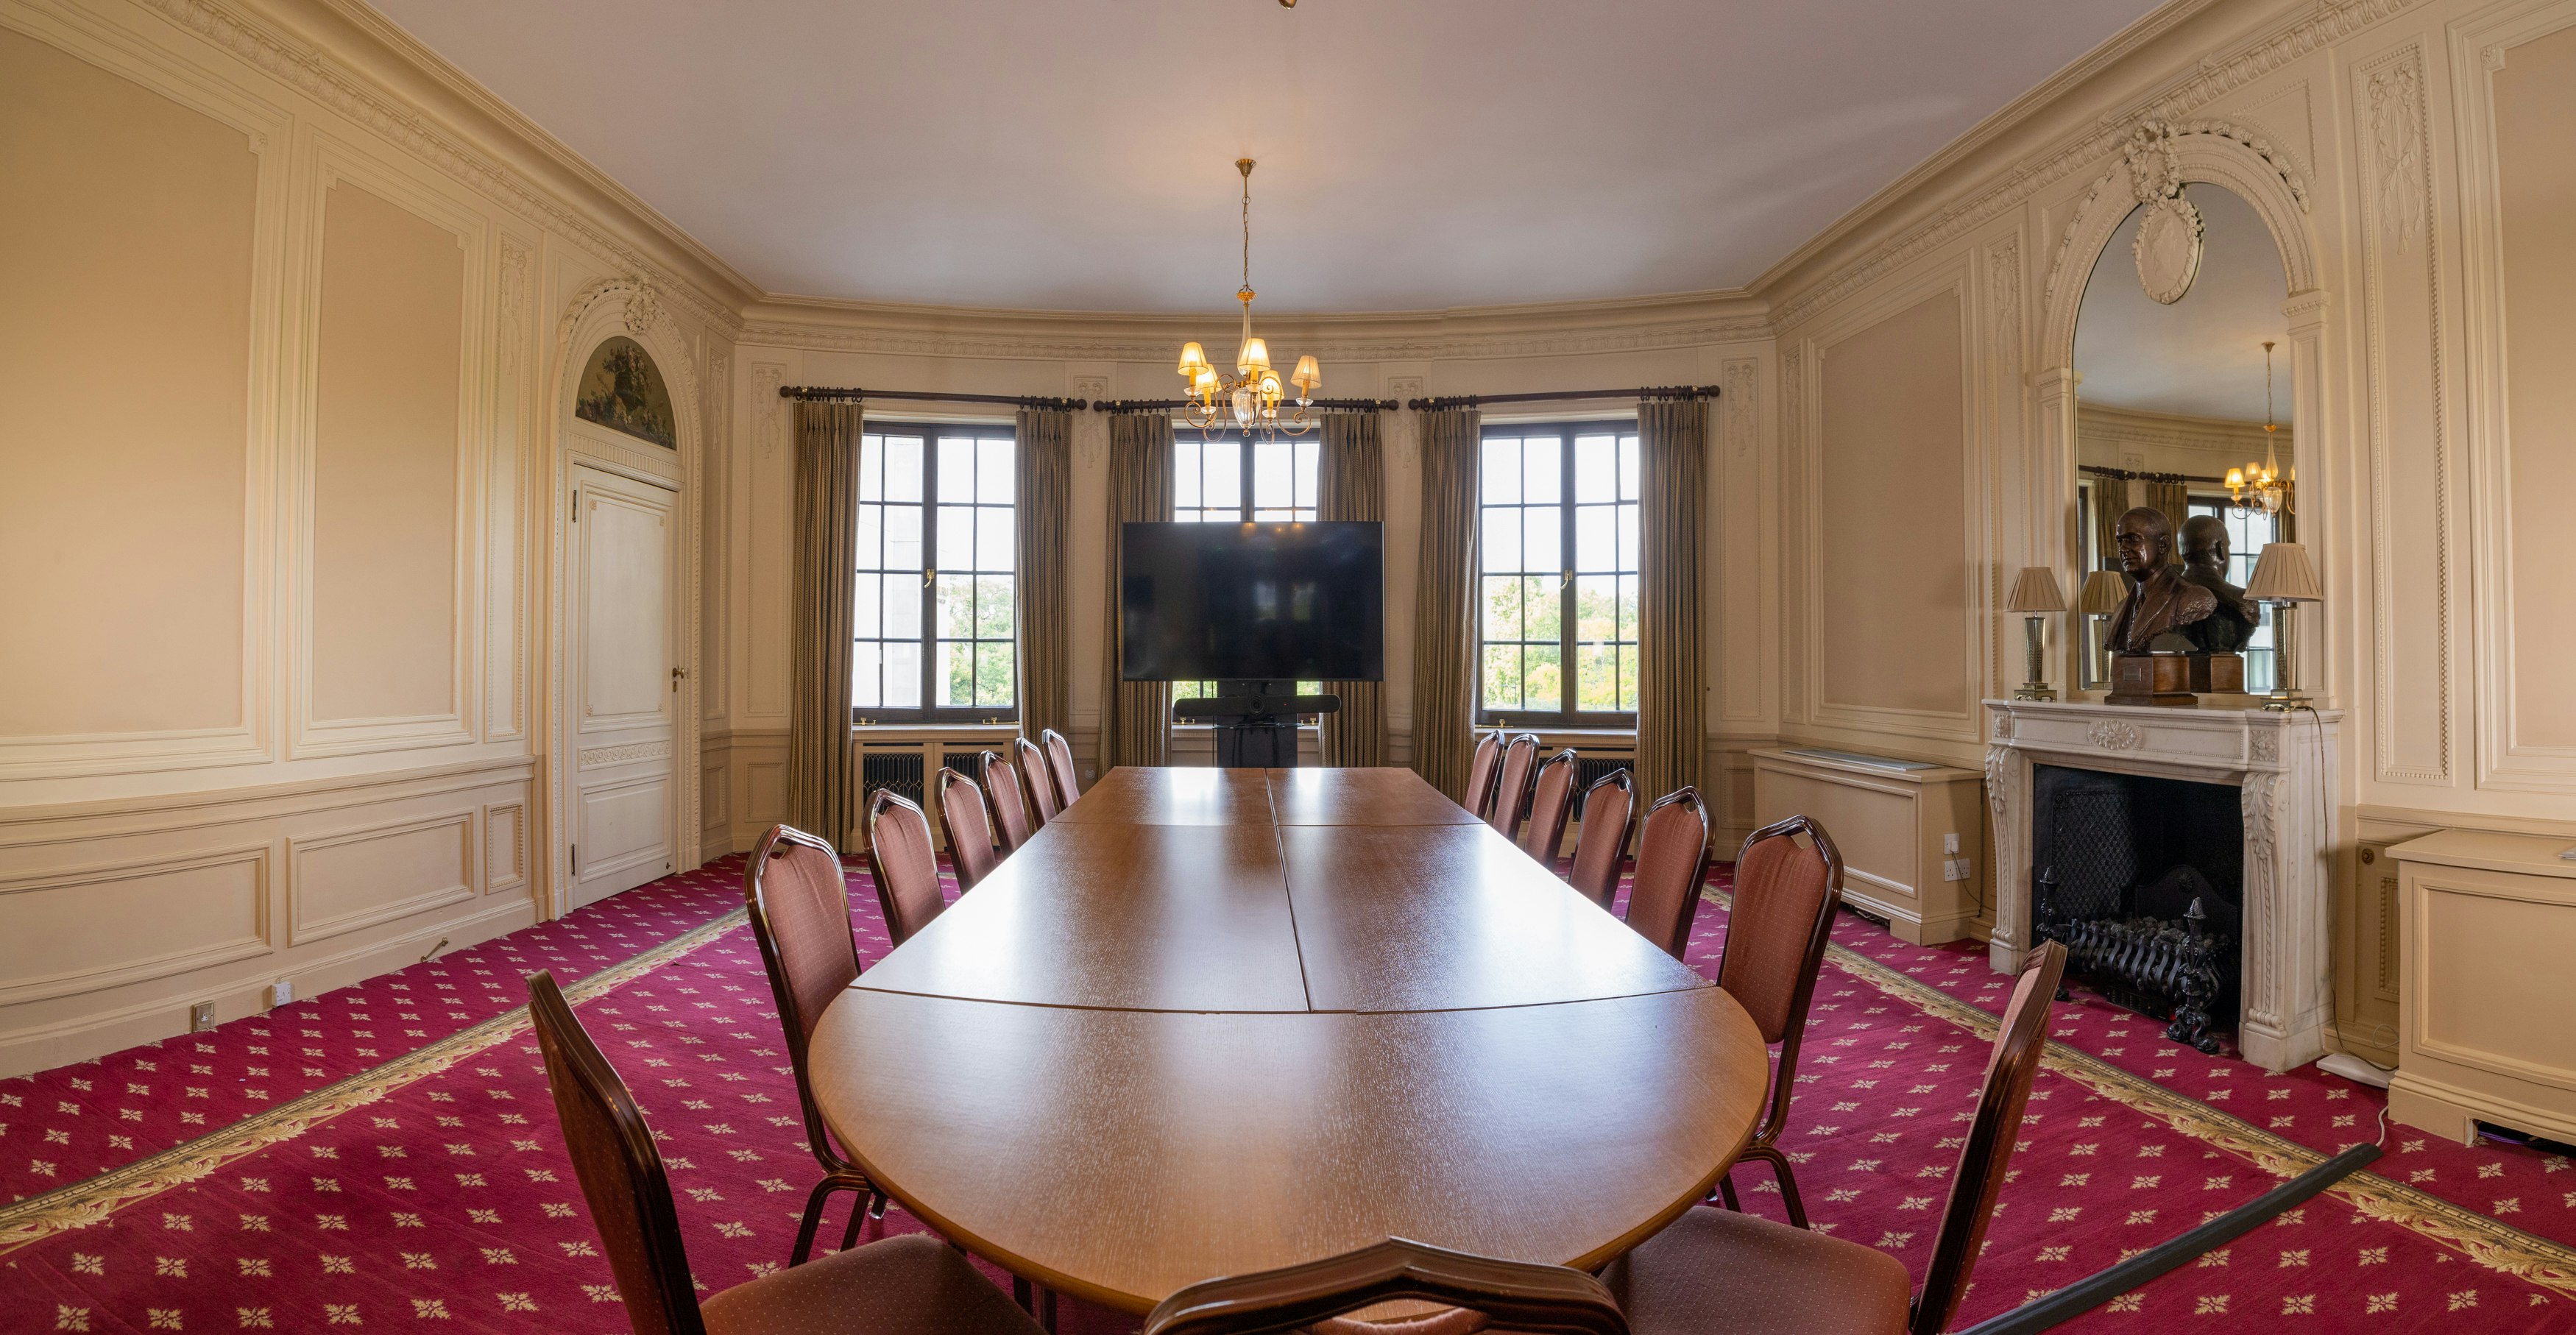 Business | Handley Page Room